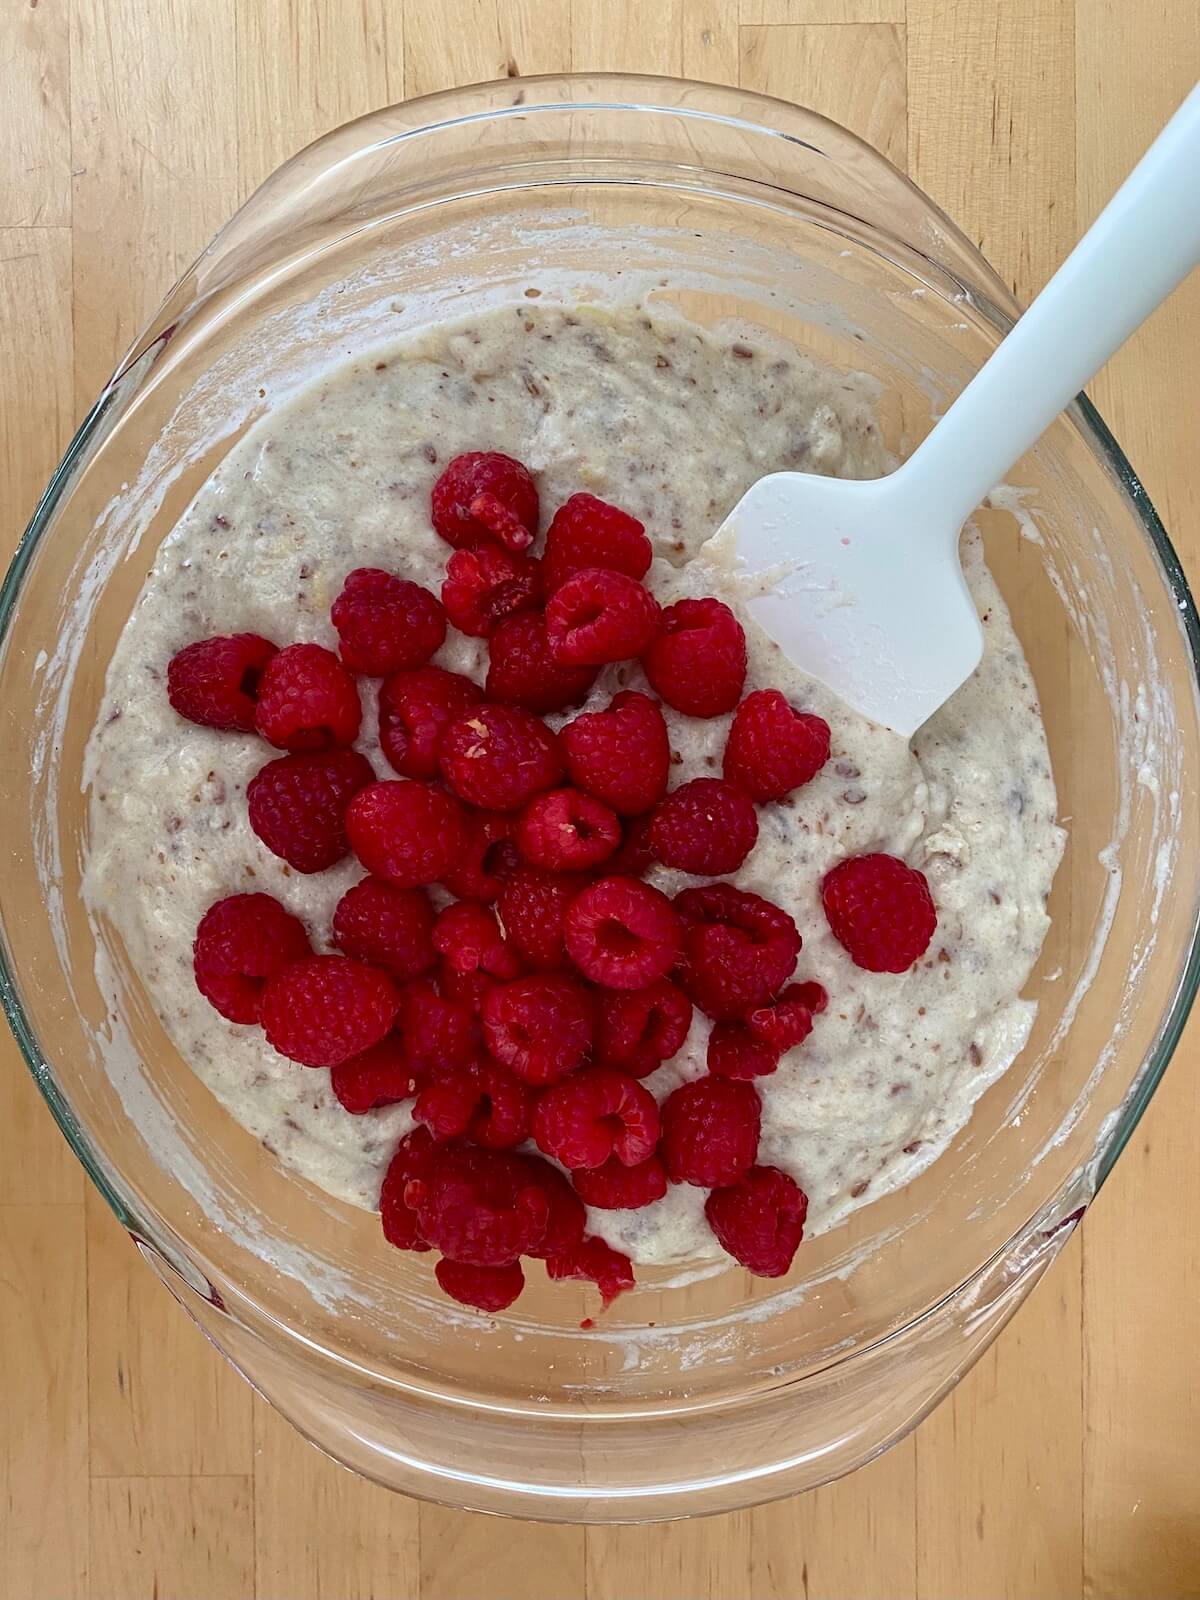 Fresh raspberries sitting on top of the mixed batter inside of a clear glass bowl. A rubber spatula is sticking out of the bowl to the right.